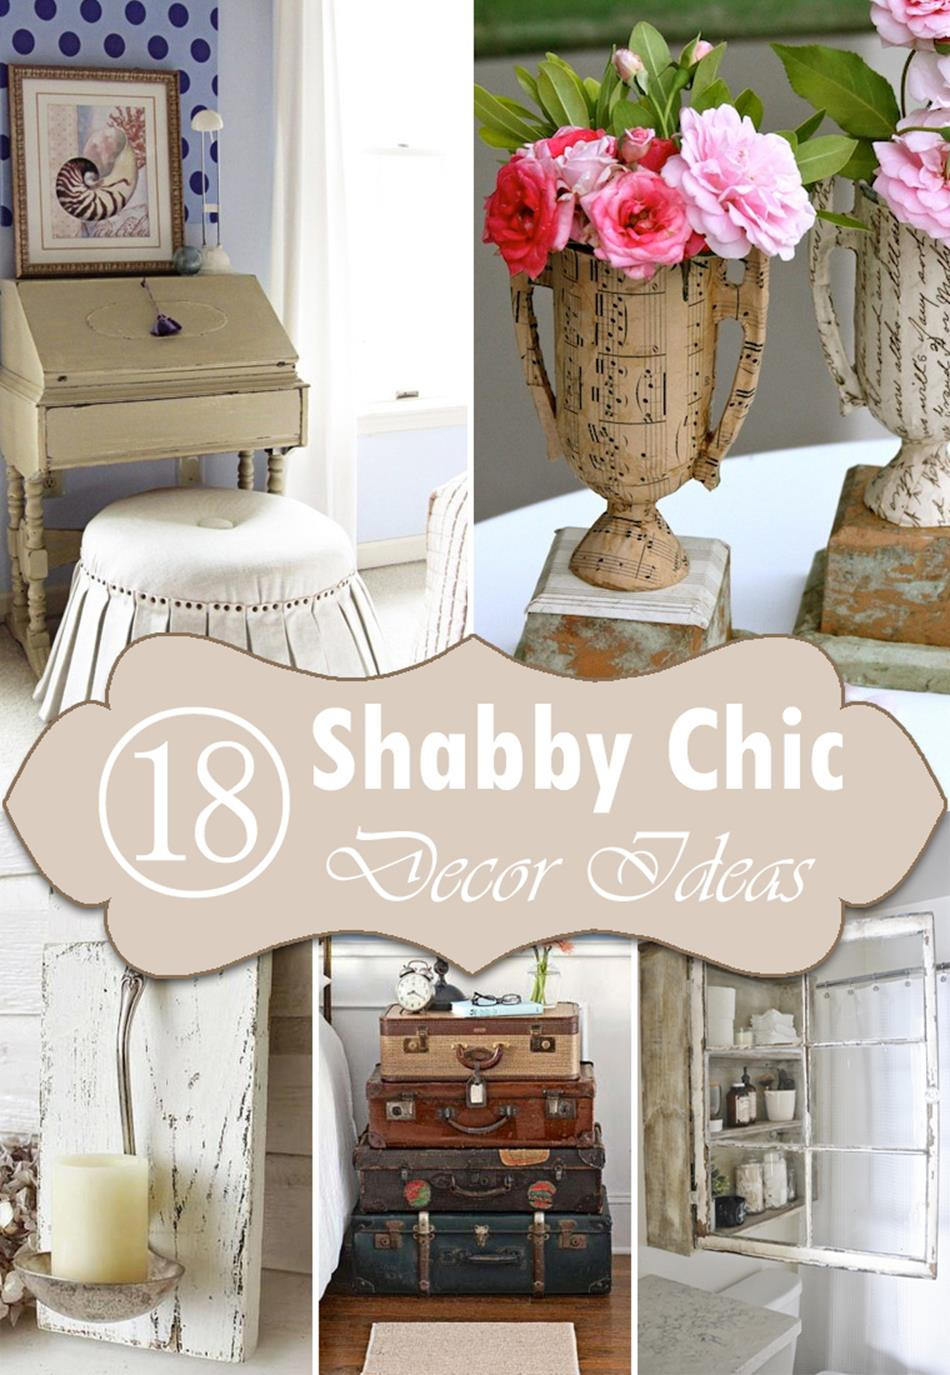 DIY Apartment Decorating On A Budget
 Shabby Chic Living Room Decorating on A Bud 4 DecoRelated